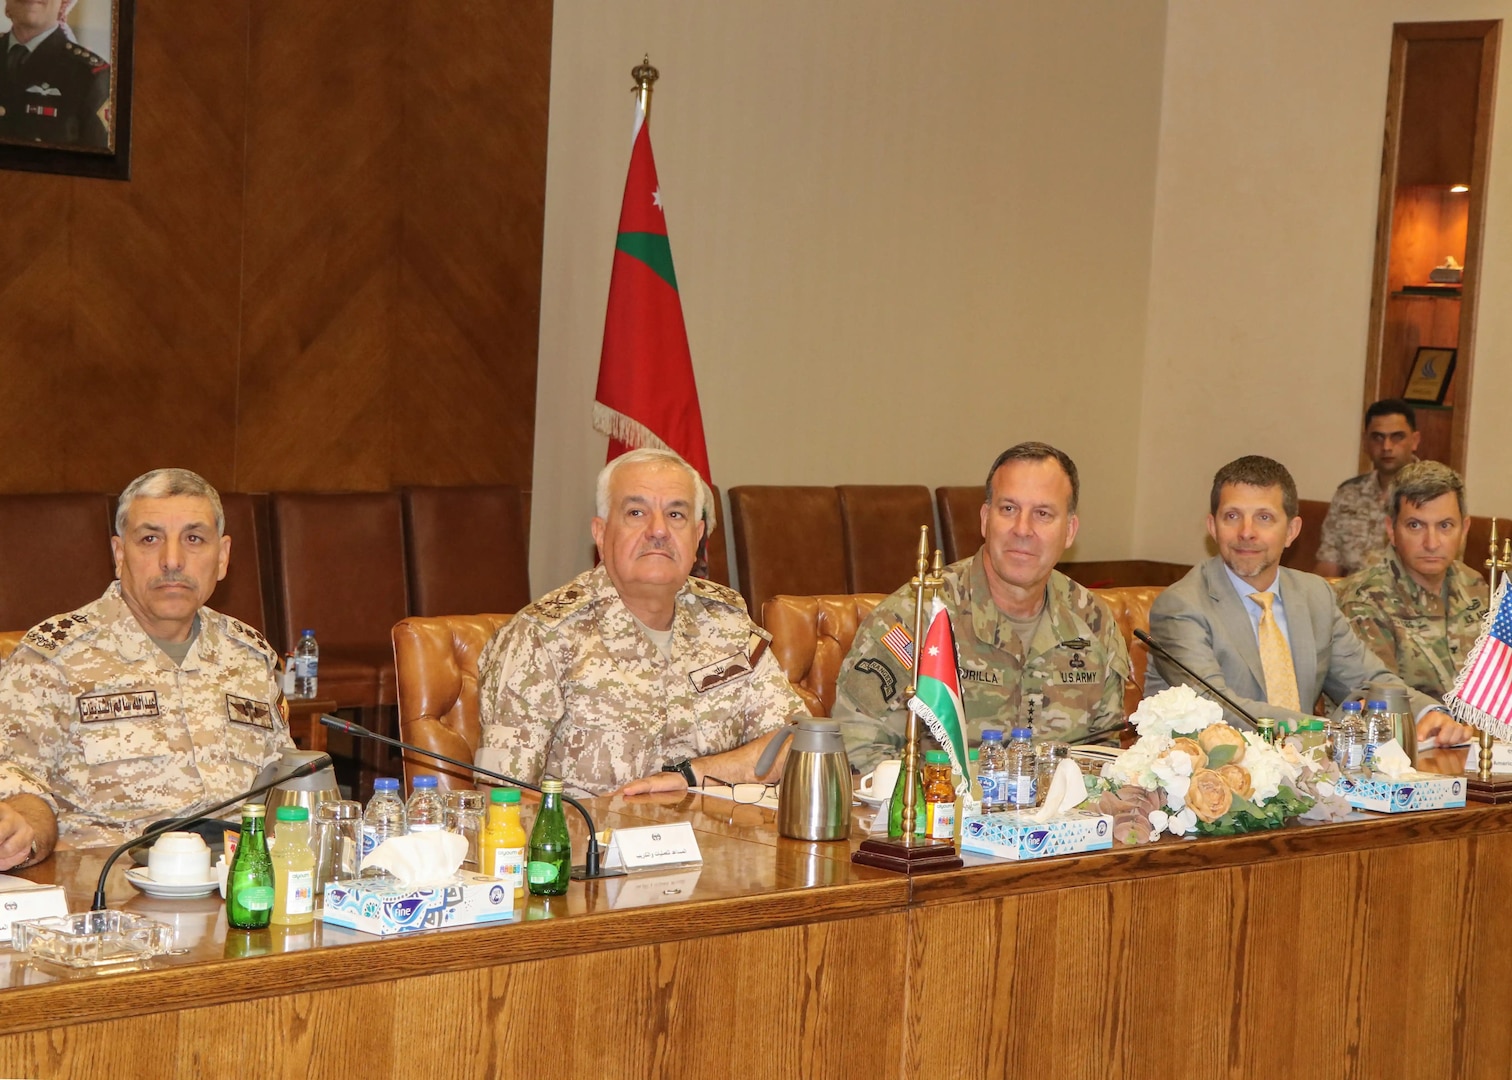 U.S. Central Command commander Gen. Erik Kurilla met with Jordan Armed Forces Chairman of the Joint Chiefs of Staff Maj. Gen. Youssef Ahmed Al-Hanaiti in Amman, May 19.
The leaders discussed continued cooperation between U.S. and Jordan, joint military operations, modernization of shared technologies and integration during field operations.
During the meeting, Kurilla made clear his intentions to strengthen the relationship between the two militaries, and his desire for innovation in regional defense.